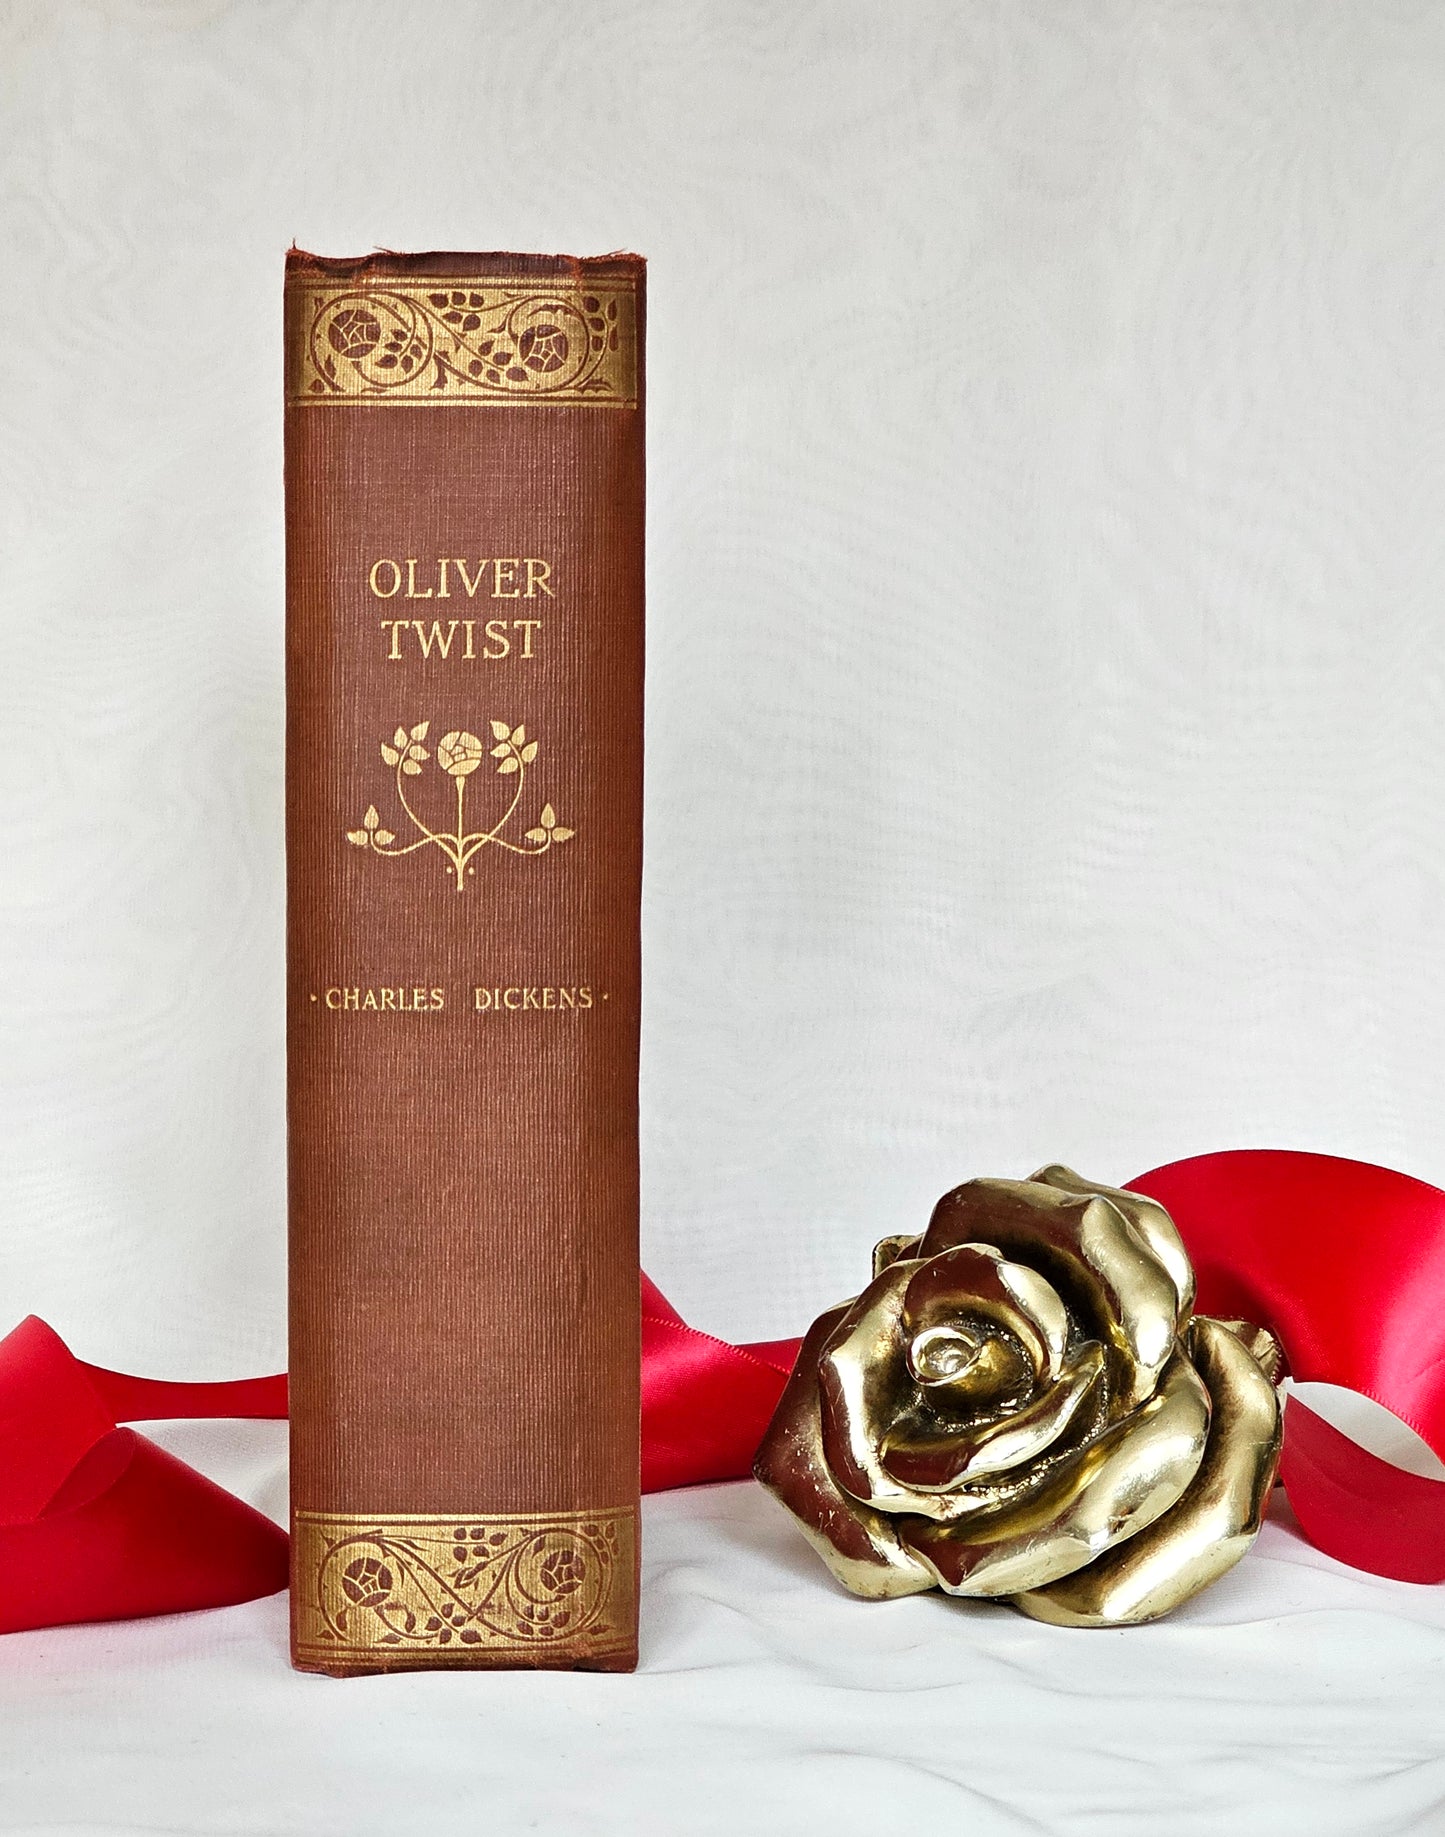 1901 Oliver Twist by Charles Dickens / The Gresham Publishing Company / Illustrated / Antique Art Nouveau Edition / In Good Condition